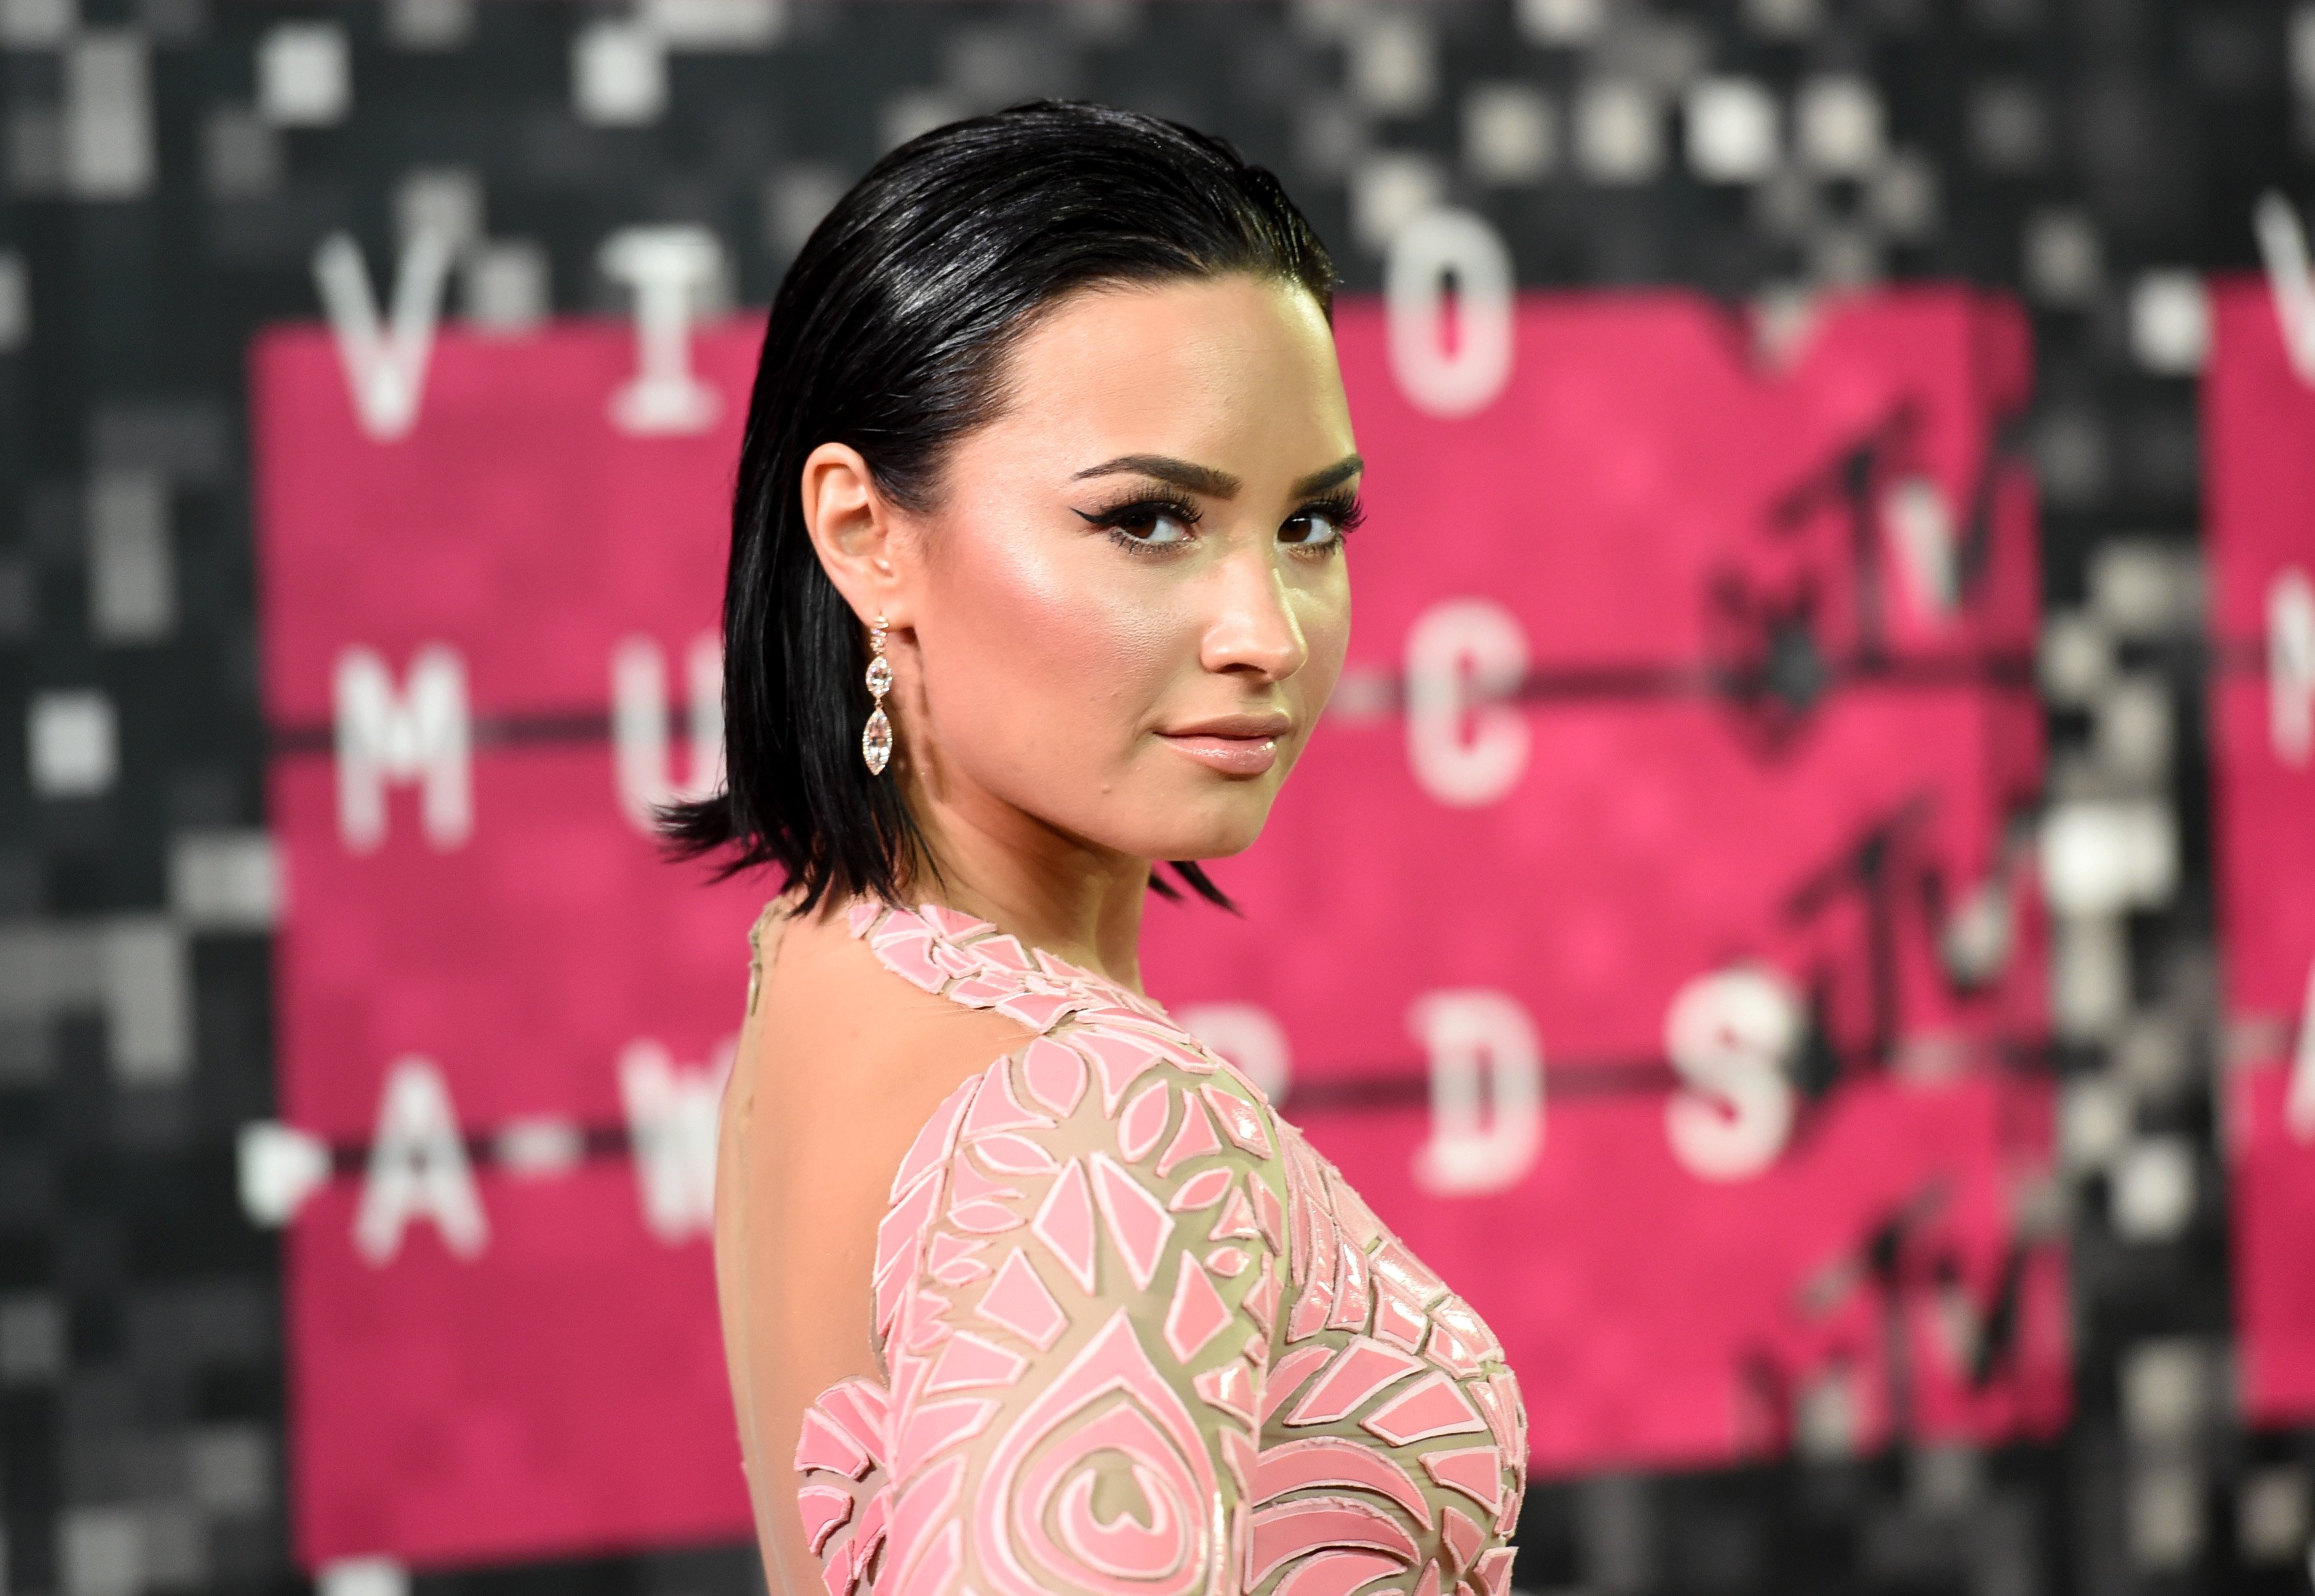 Demi Lovato attends the 2015 MTV Video Music Awards at Microsoft Theater on August 30, 2015 | Photo: Getty Images